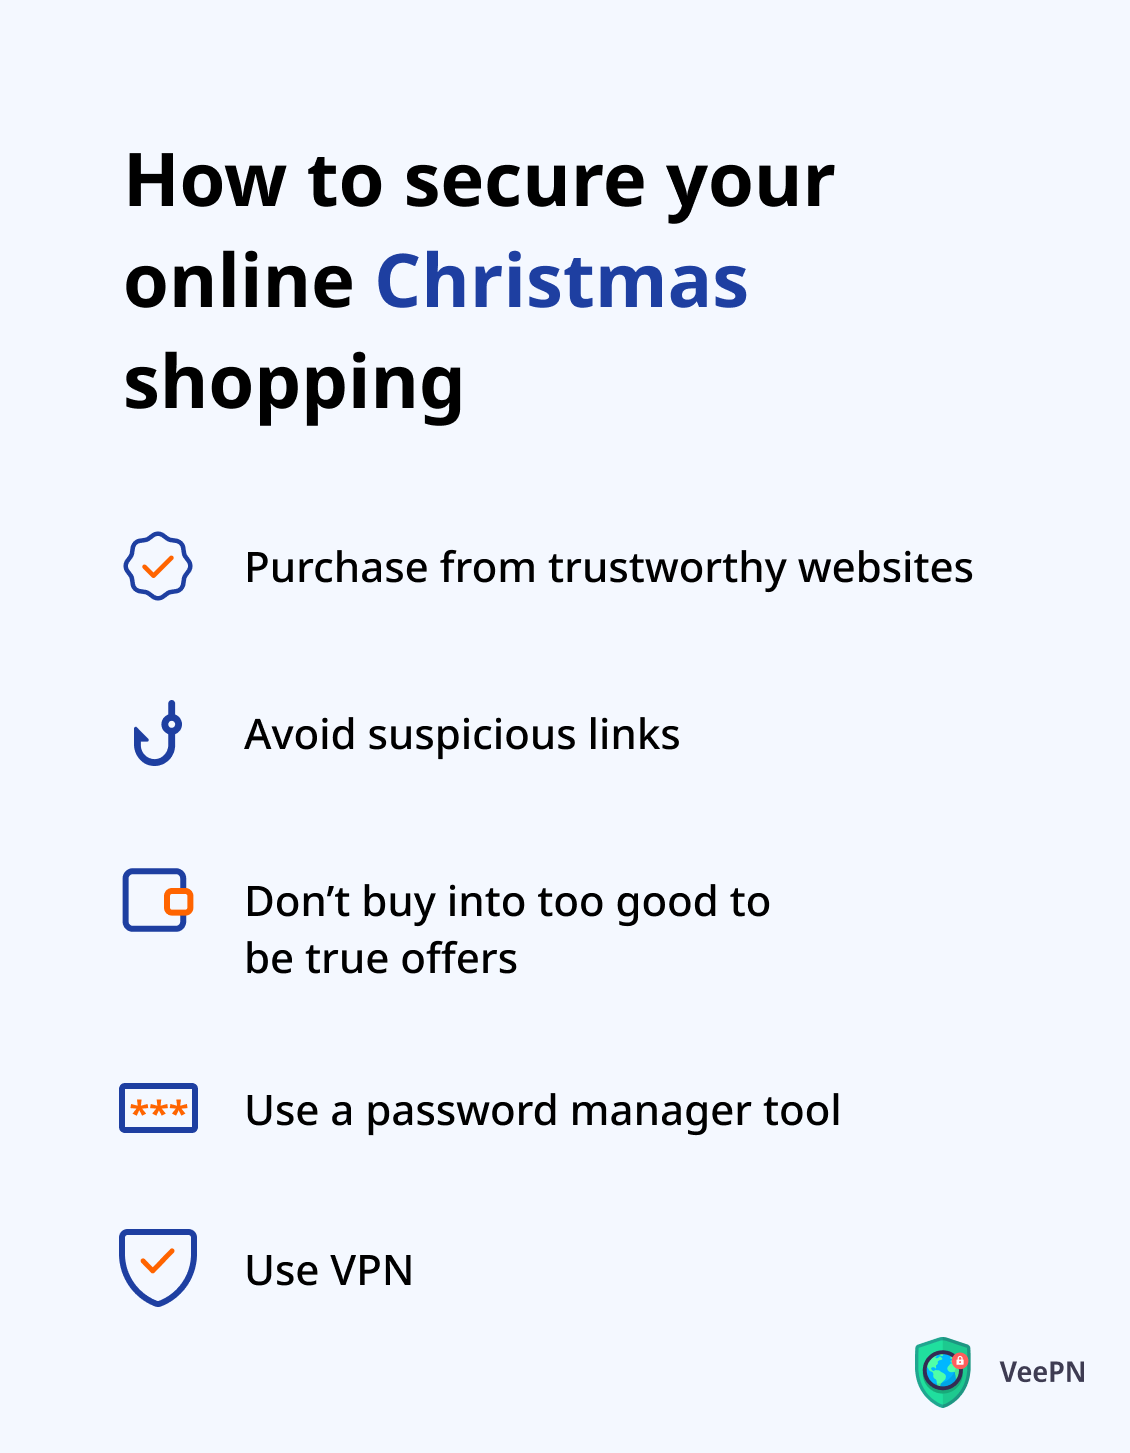 How to secure your online Christmas shopping.